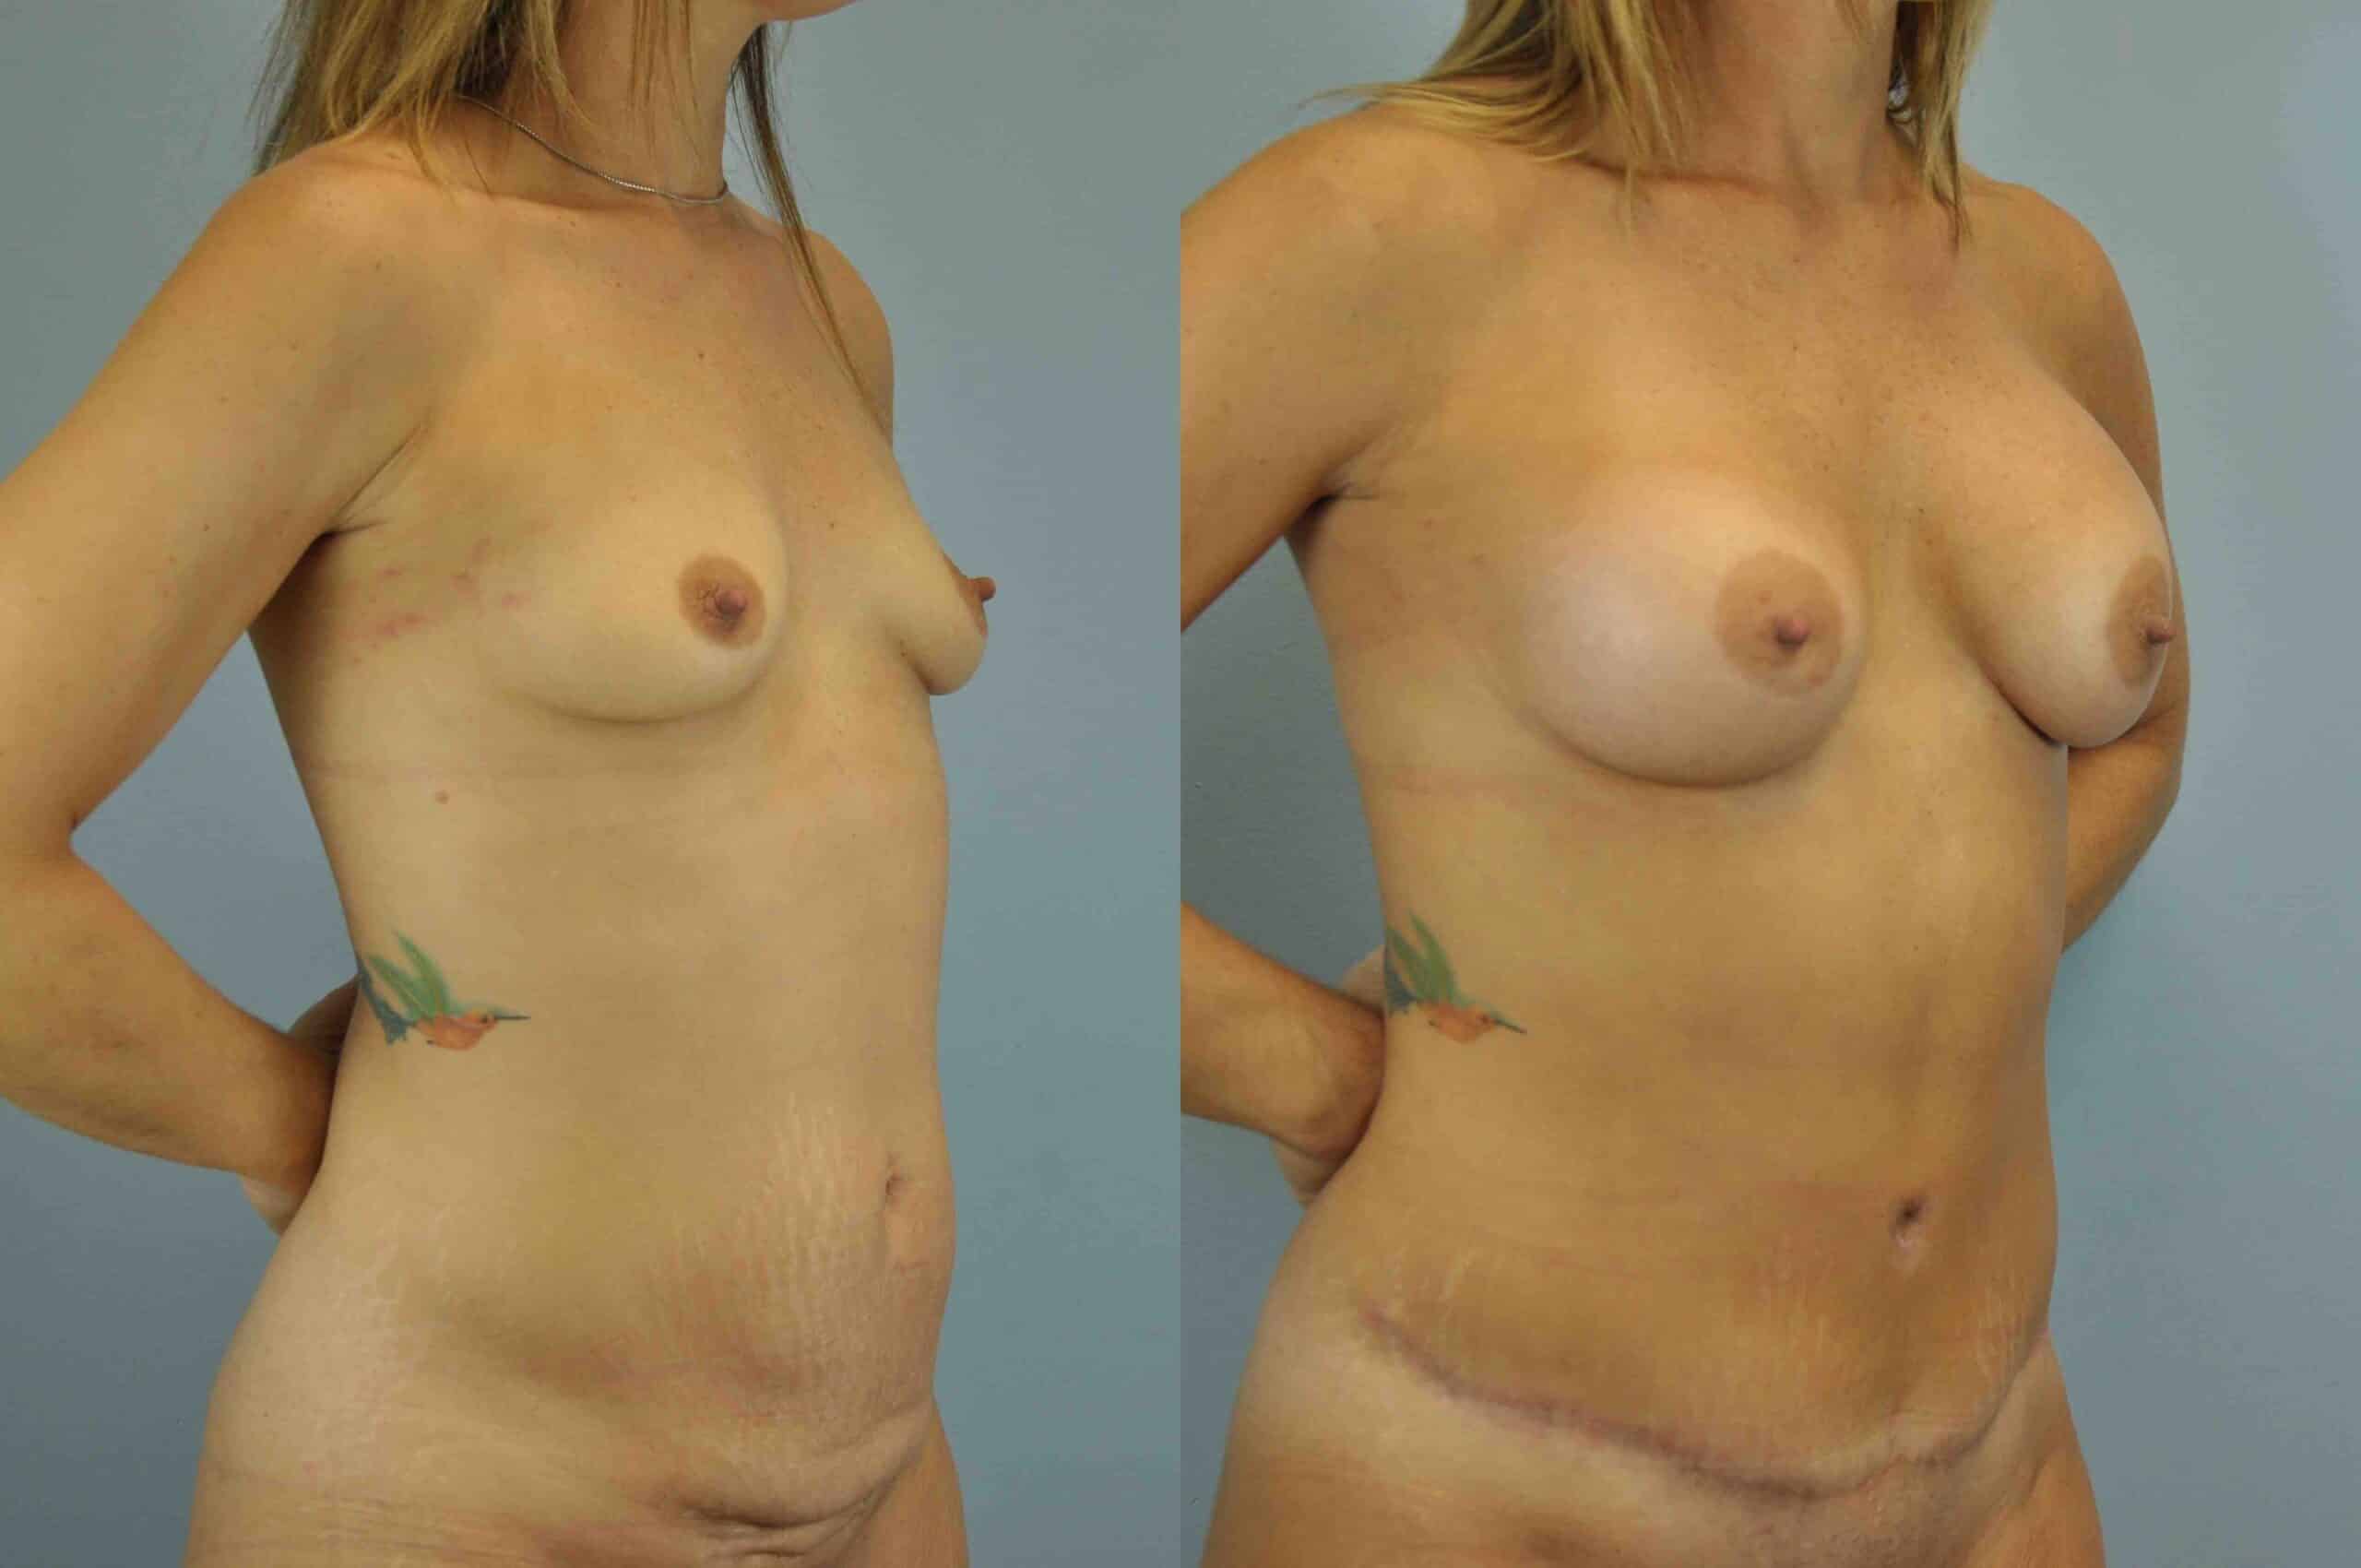 Before and after, 2 mo post op from Tummy Tuck, Breast Augmentation performed by Dr. Paul Vanek (diagonal view)